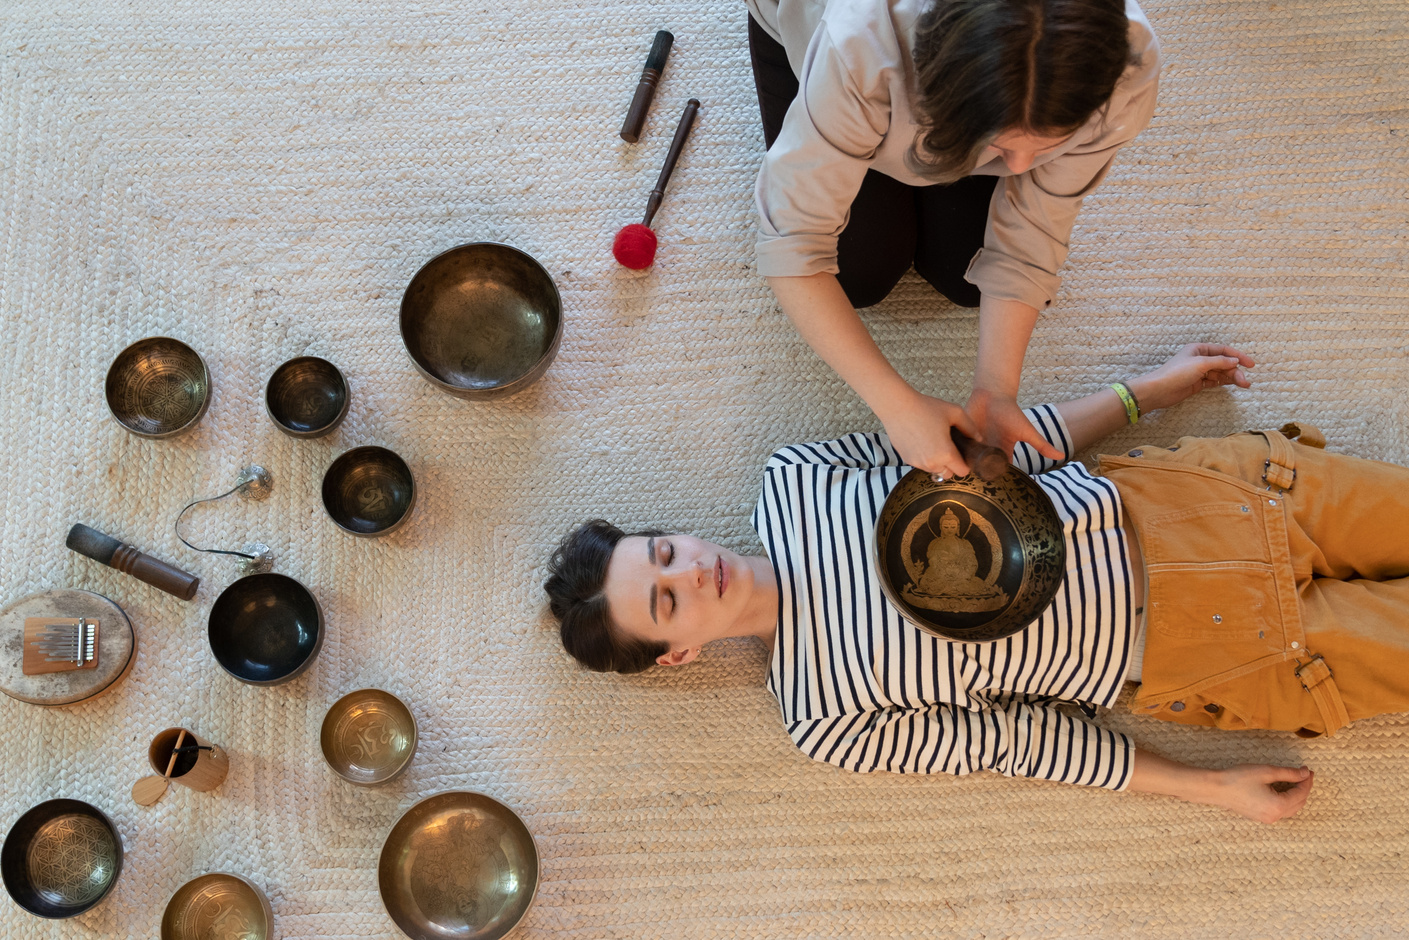 Client Having a Tibetan Singing Bowl Therapy